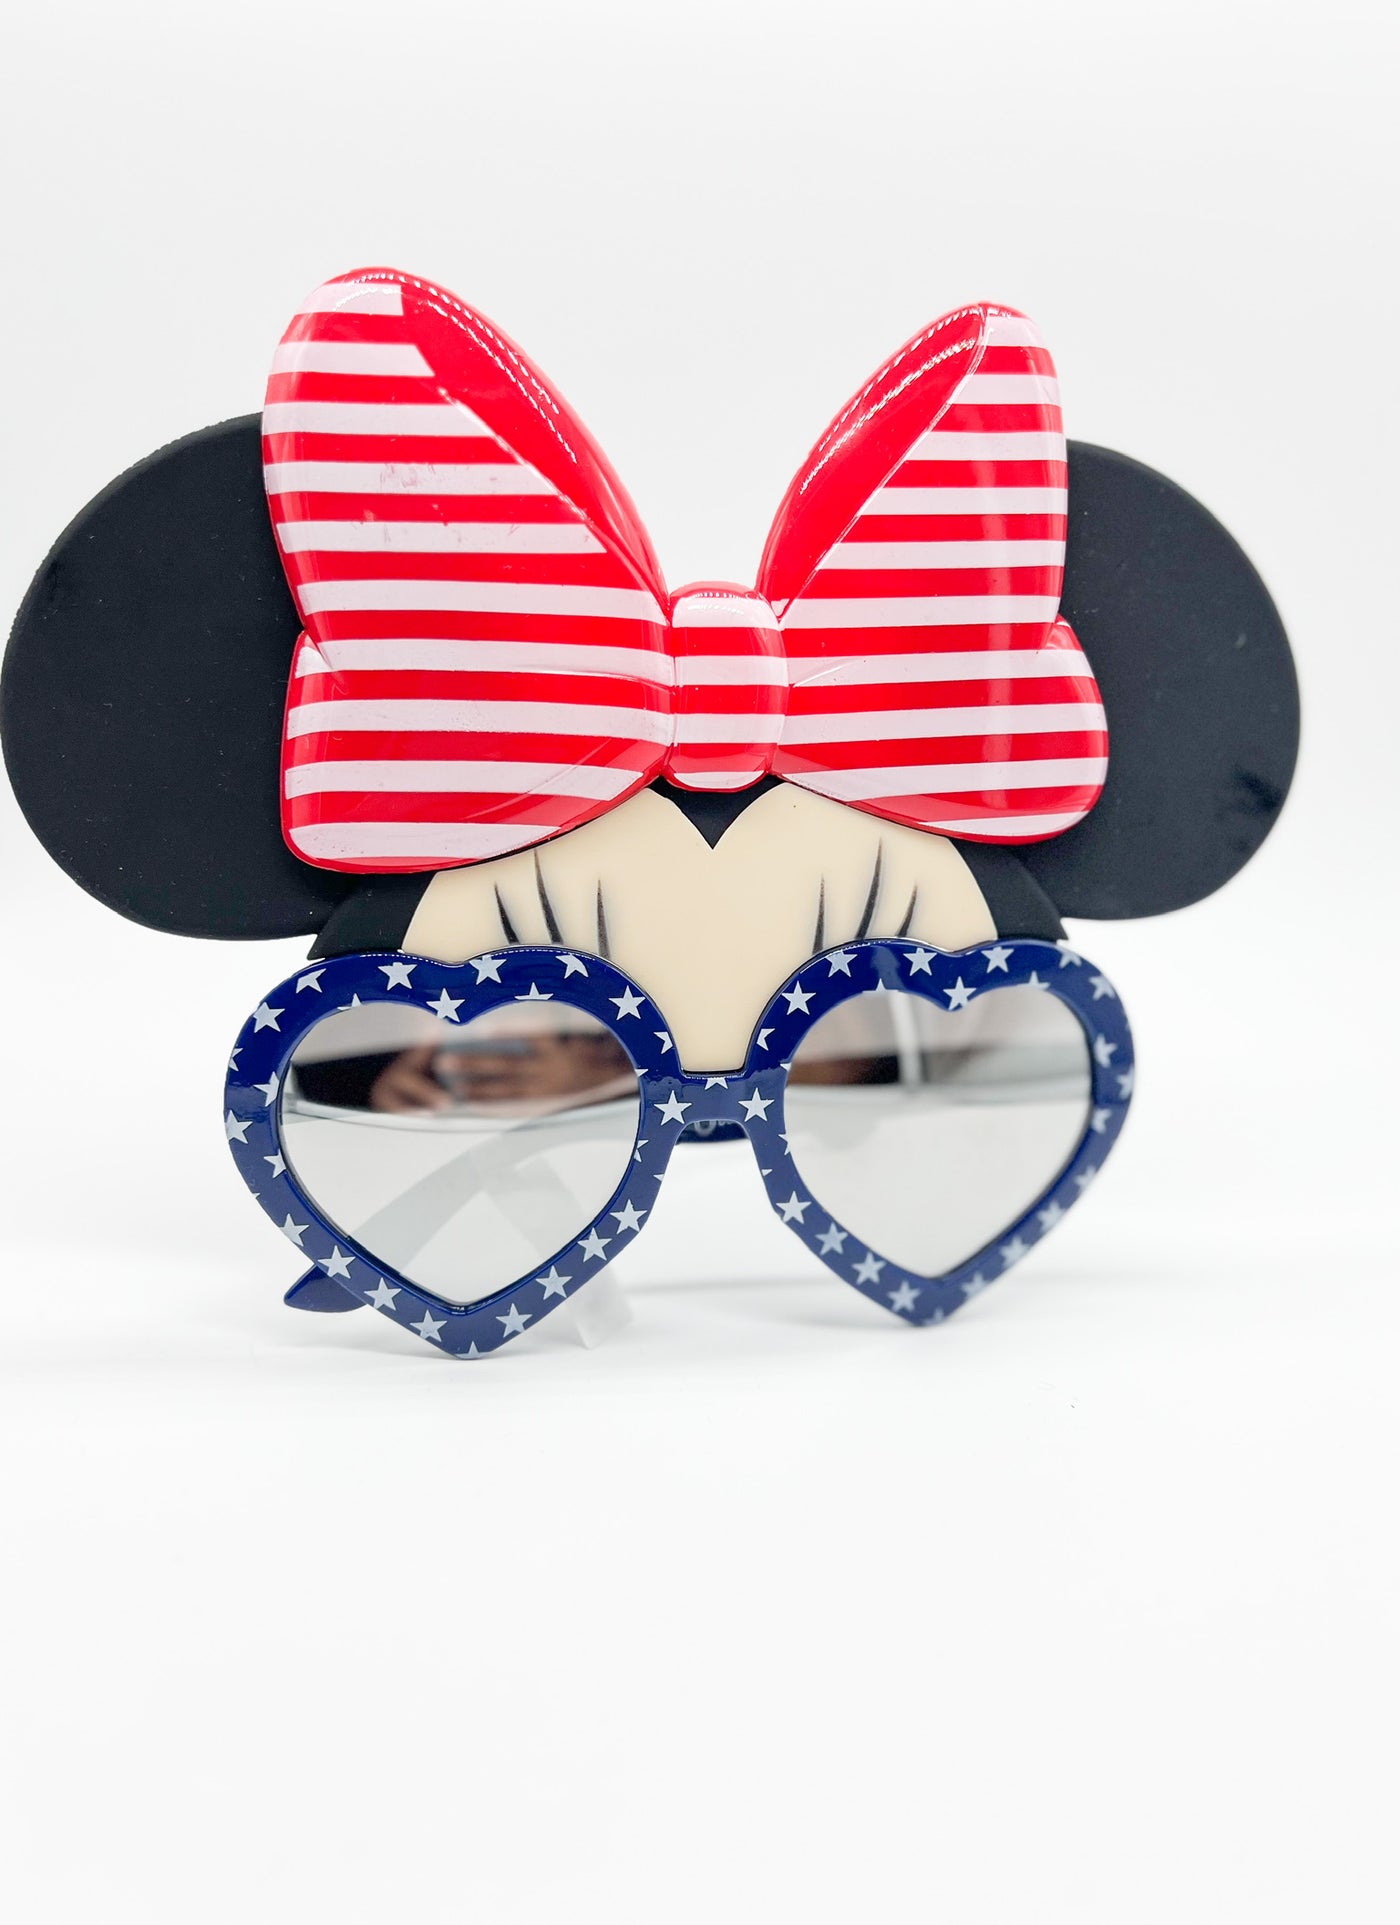 Officially Licensed Minnie Sun Staches